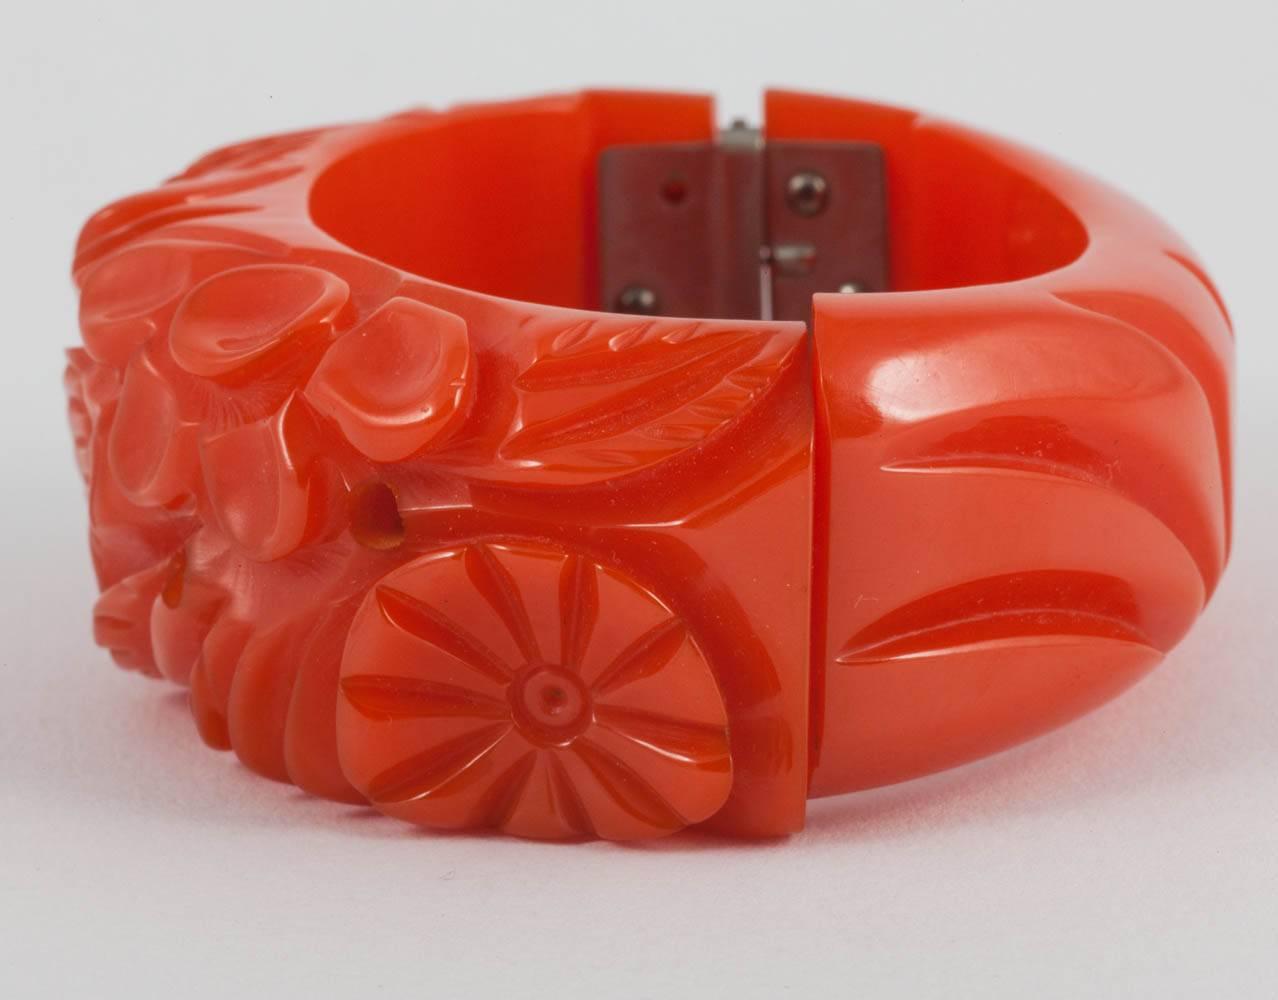 A beautiful hand carved bakelite bracelet, in a vivid,strong and unusual orange colourway, from the 1930s.
The hinged mechanism works perfectly and securely.
This is one of a group of five similar bakelite bangles being sold (all pictures below),